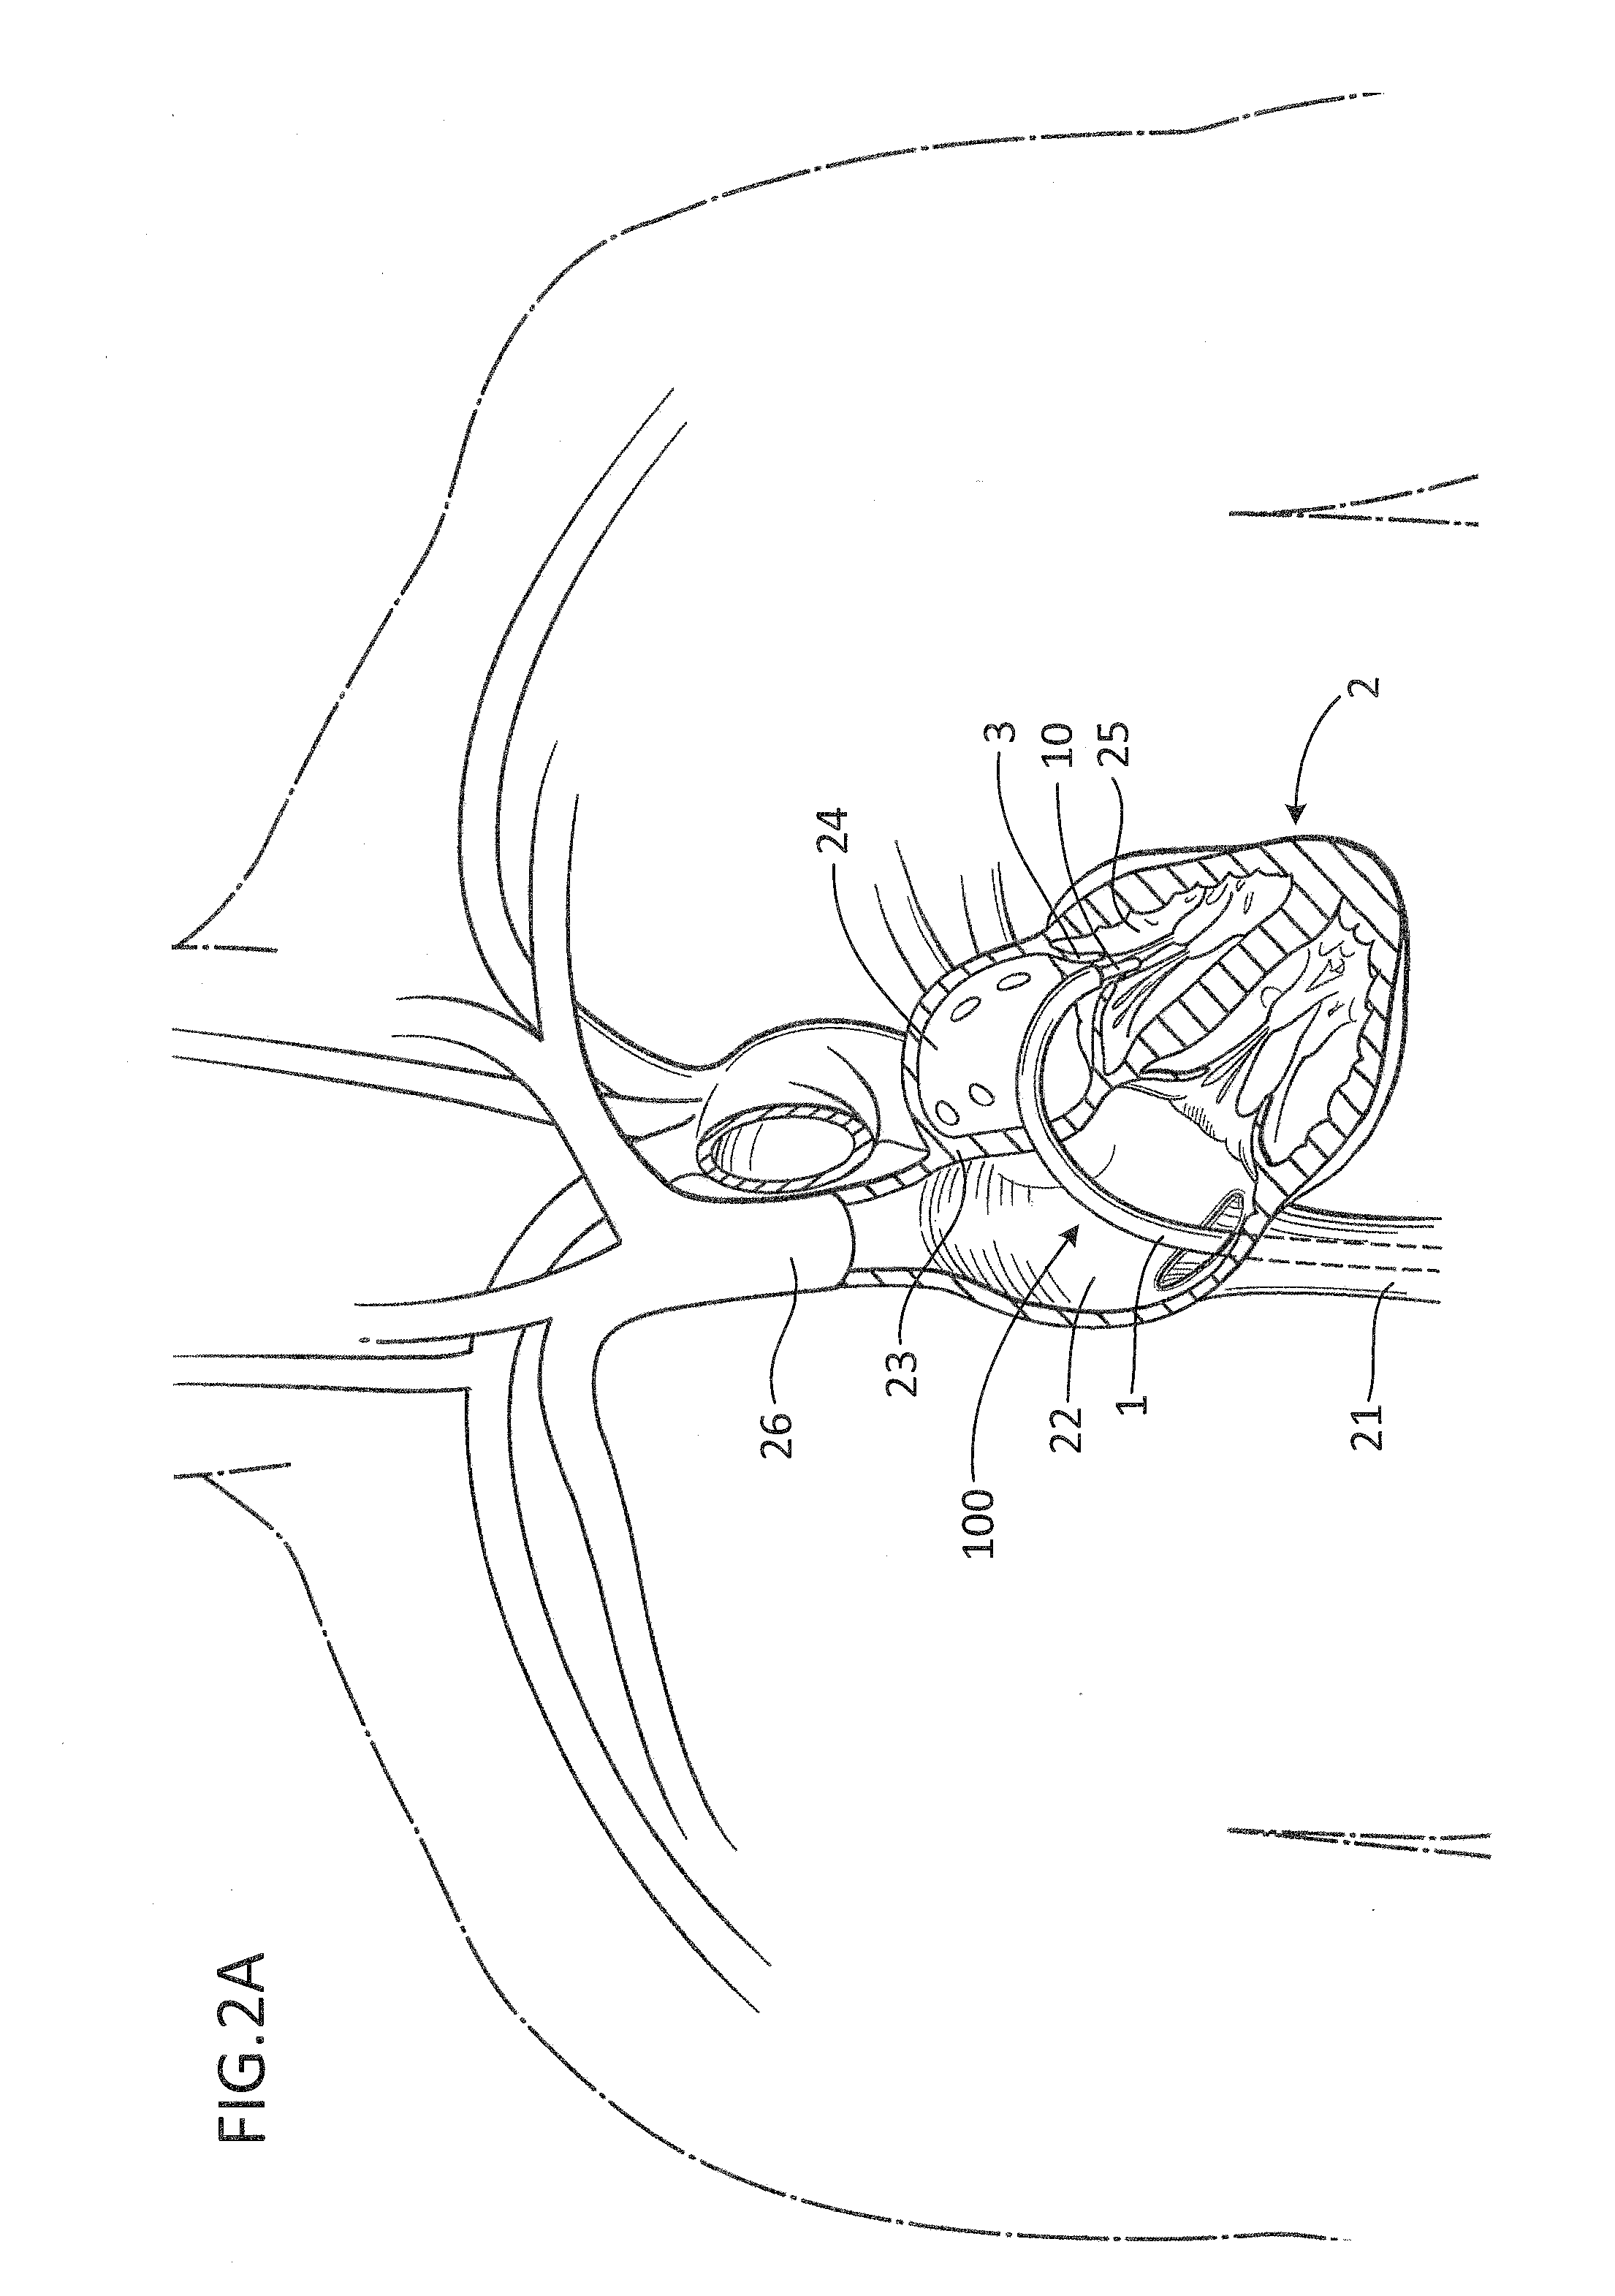 Devices, systems and methods for delivering a prosthetic mitral valve and anchoring device